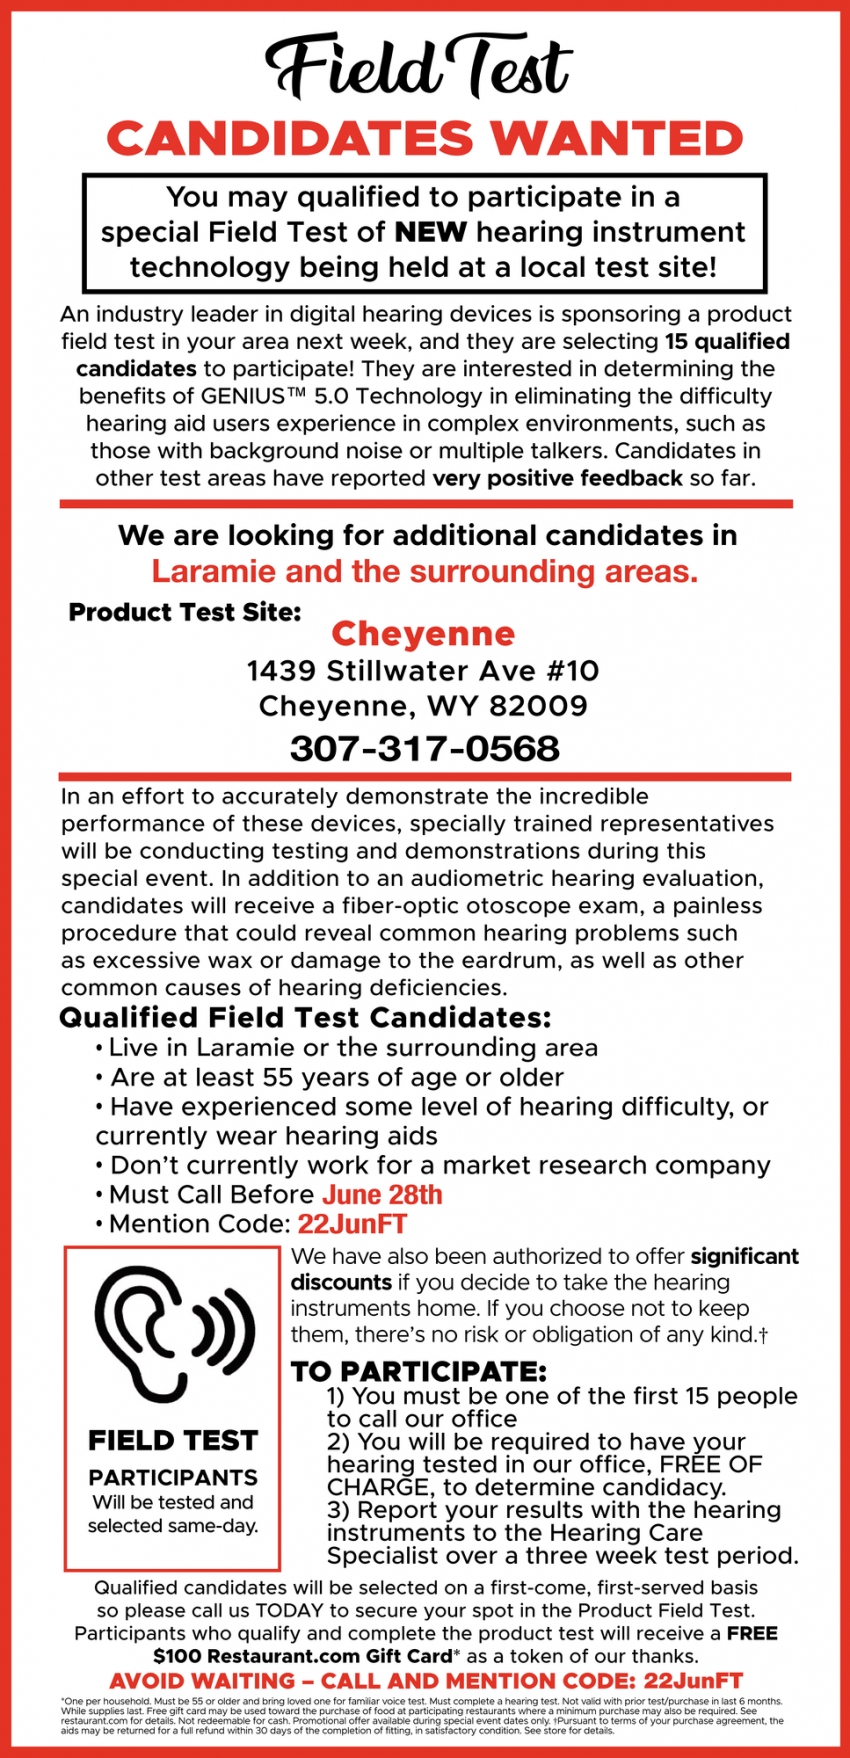 Field Test Candidates Wanted